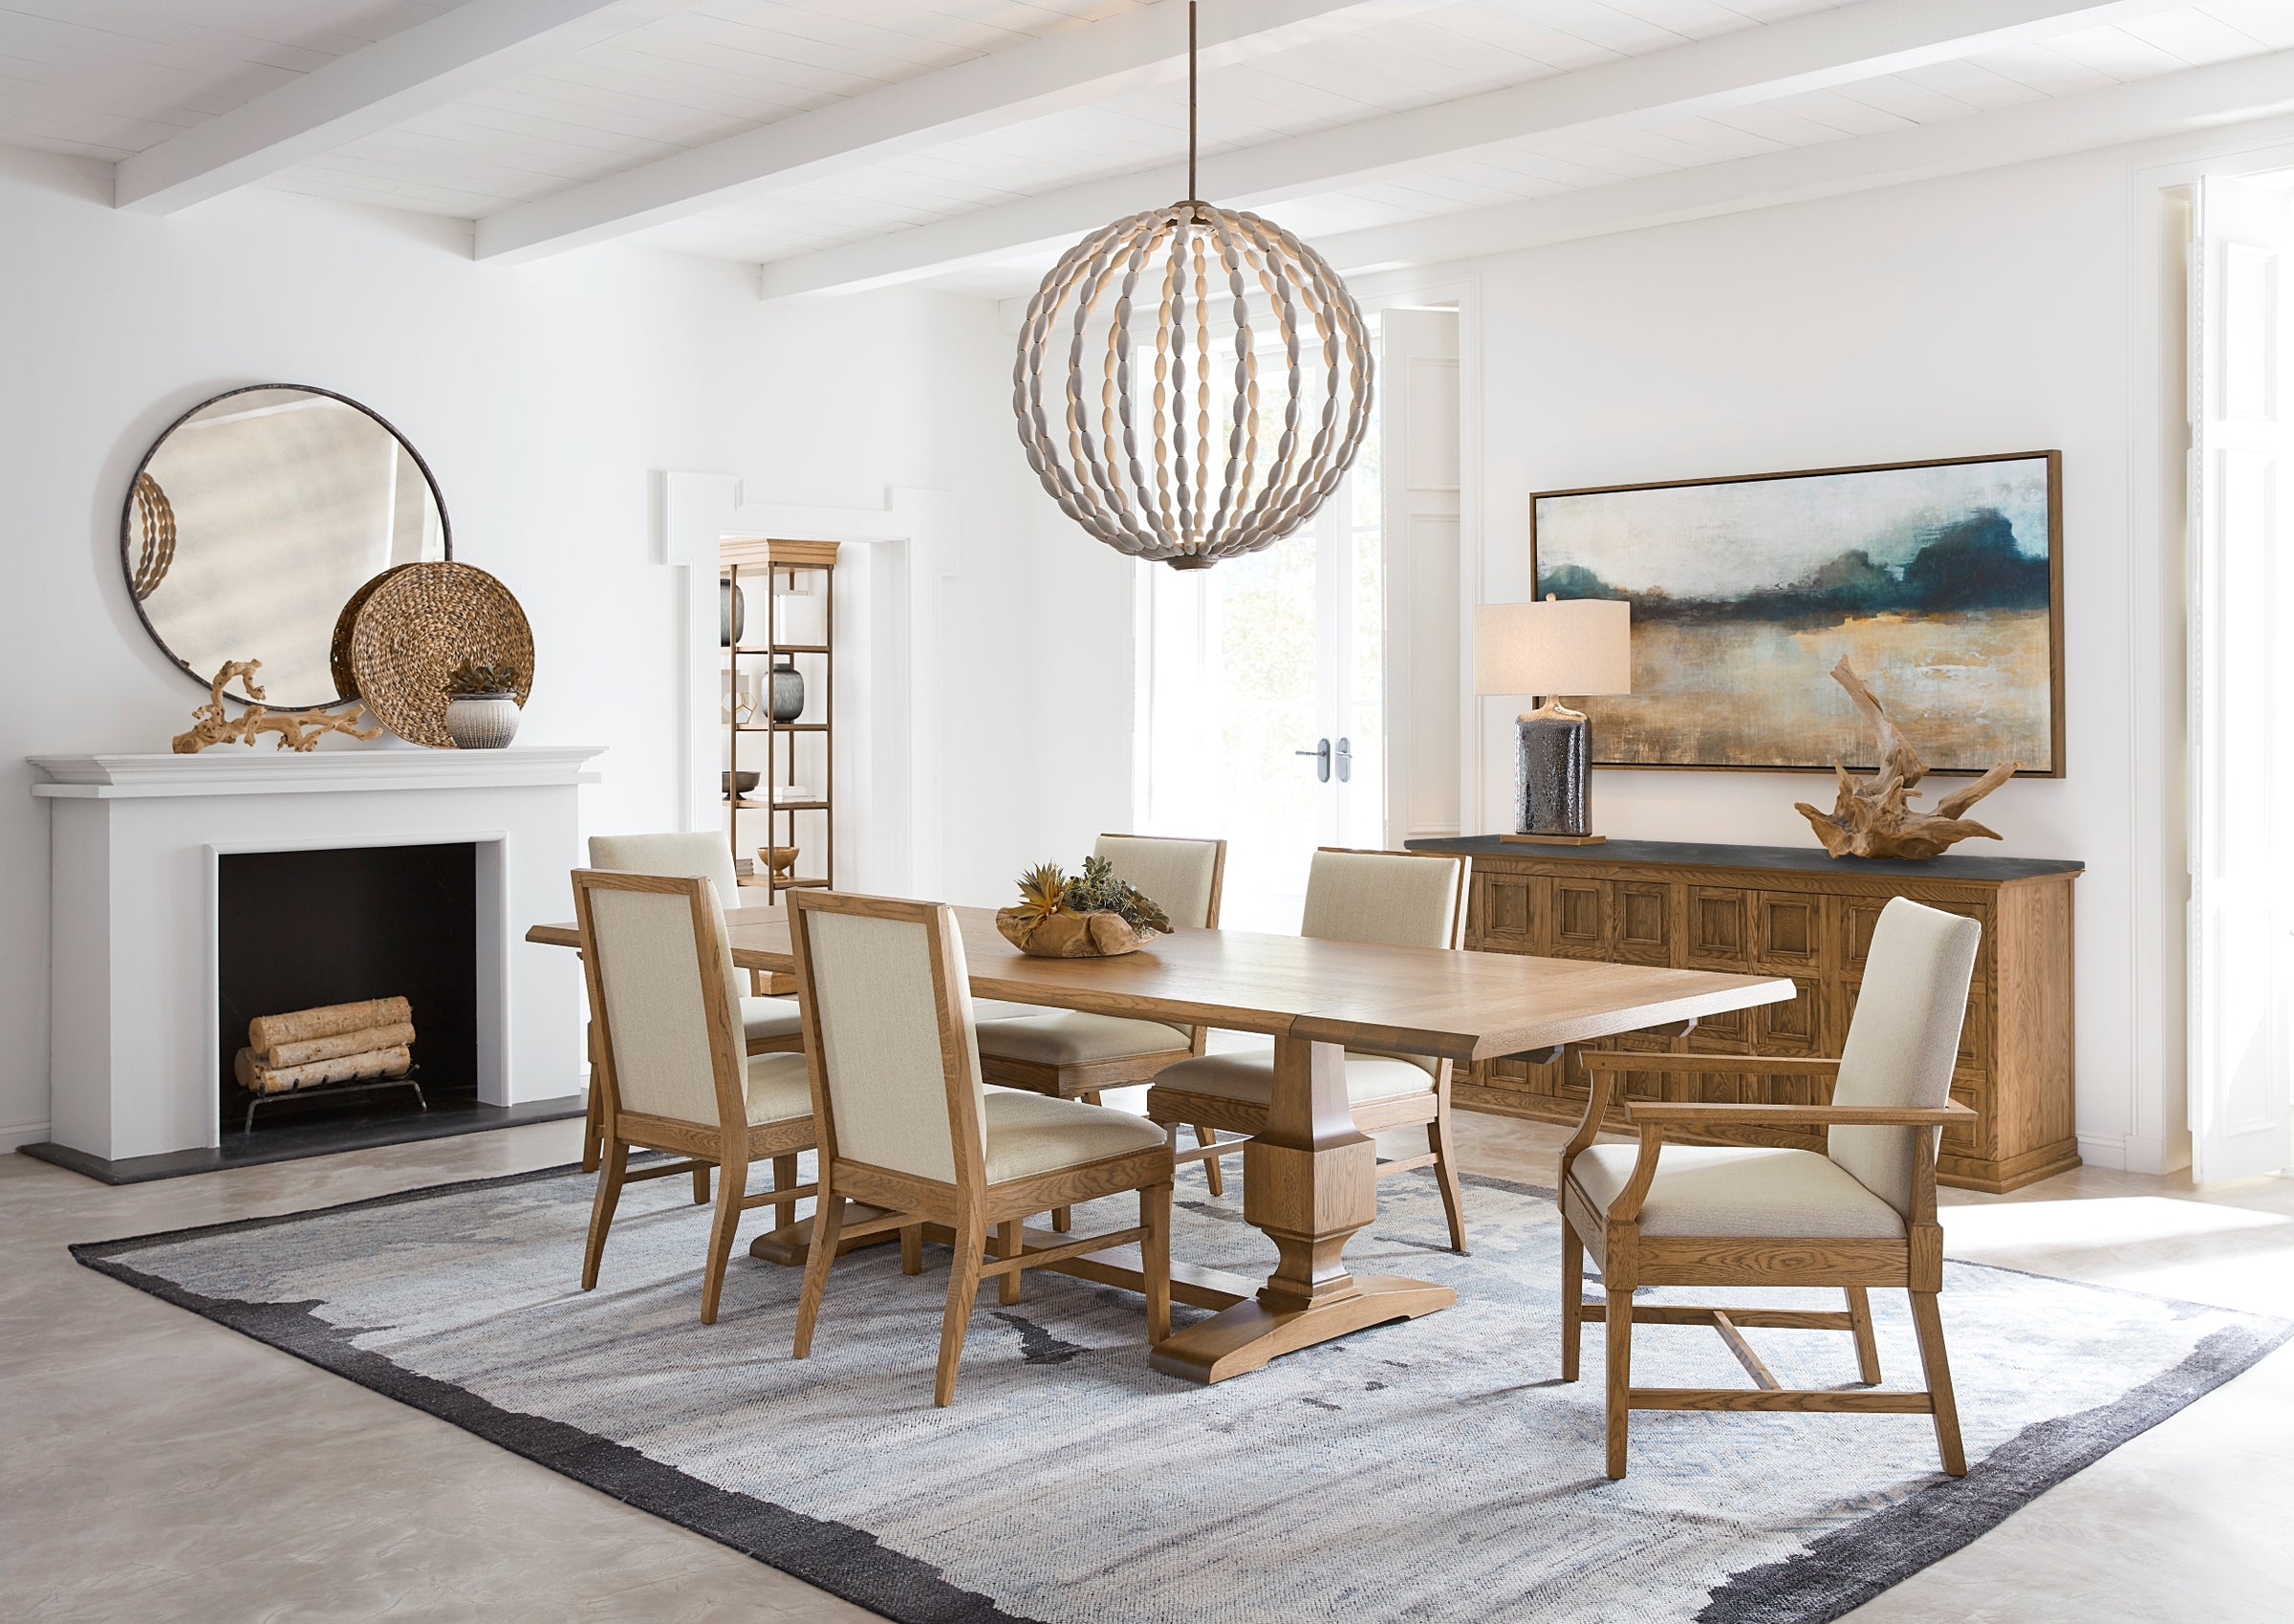 Dining room scene from Stickley's St. Lawrence collection featuring a large light wood dining table surrounded by matching fabric and wood dining chairs.